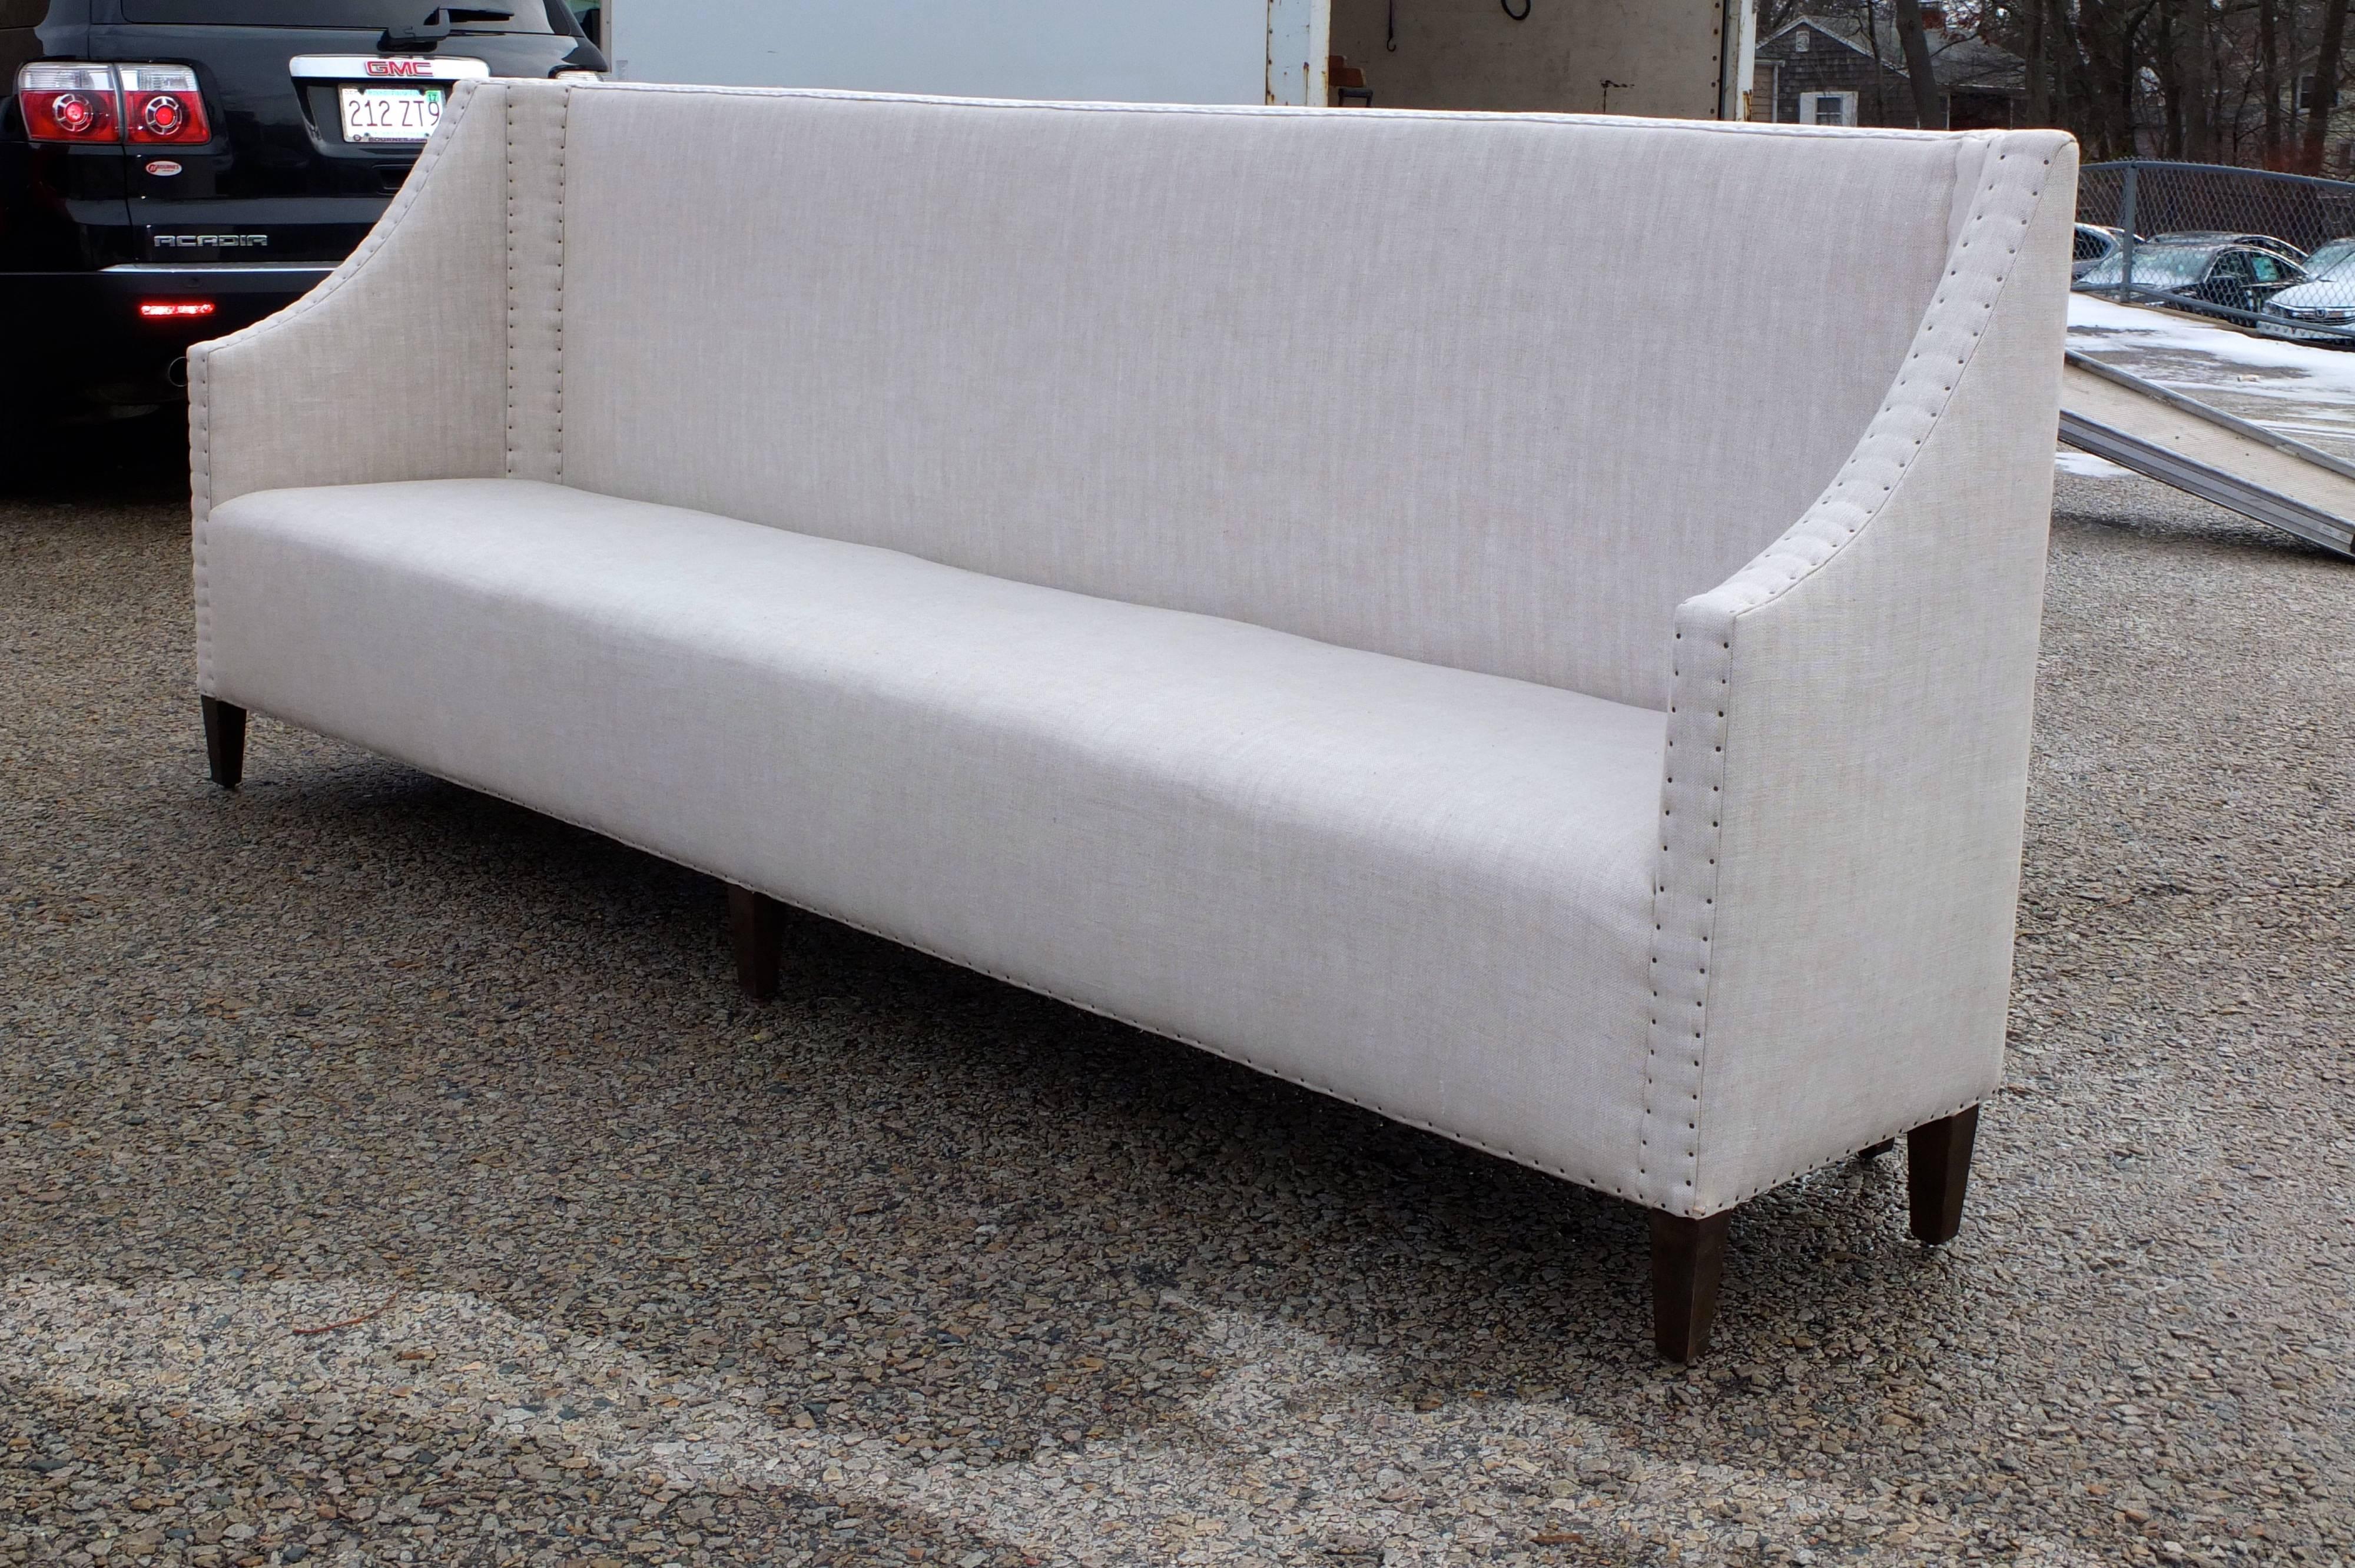 Bespoke high back banquette sofa upholstered in stone Belgian linen accented with steel nail heads and rising track arms and six tapered stained wood legs. Ten feet long, 46 inches high, 29 inches deep, 20 inch seat height. In like new condition.